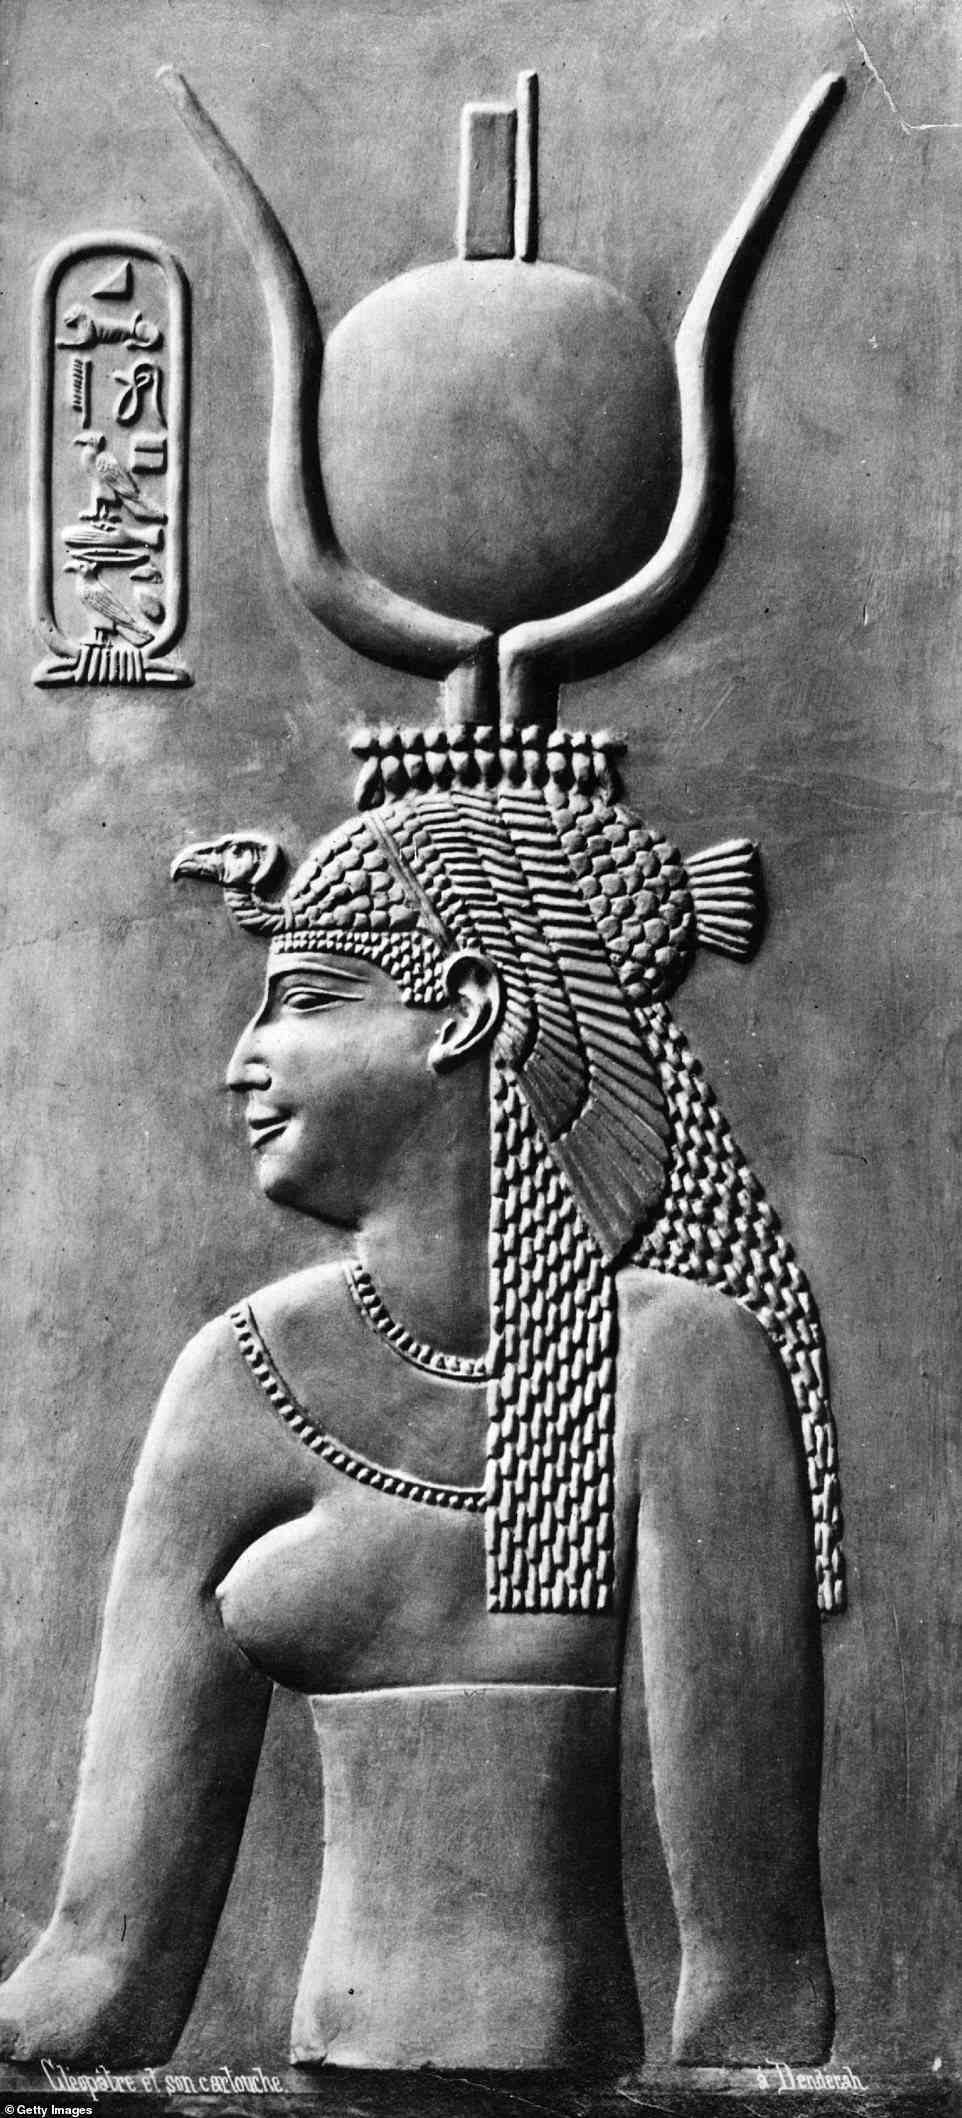 Cleopatra ruled from 51 BC to 30 BC - right up until the day she died. She was the queen of Egypt and the last and most famous of the Ptolemaic dynasty